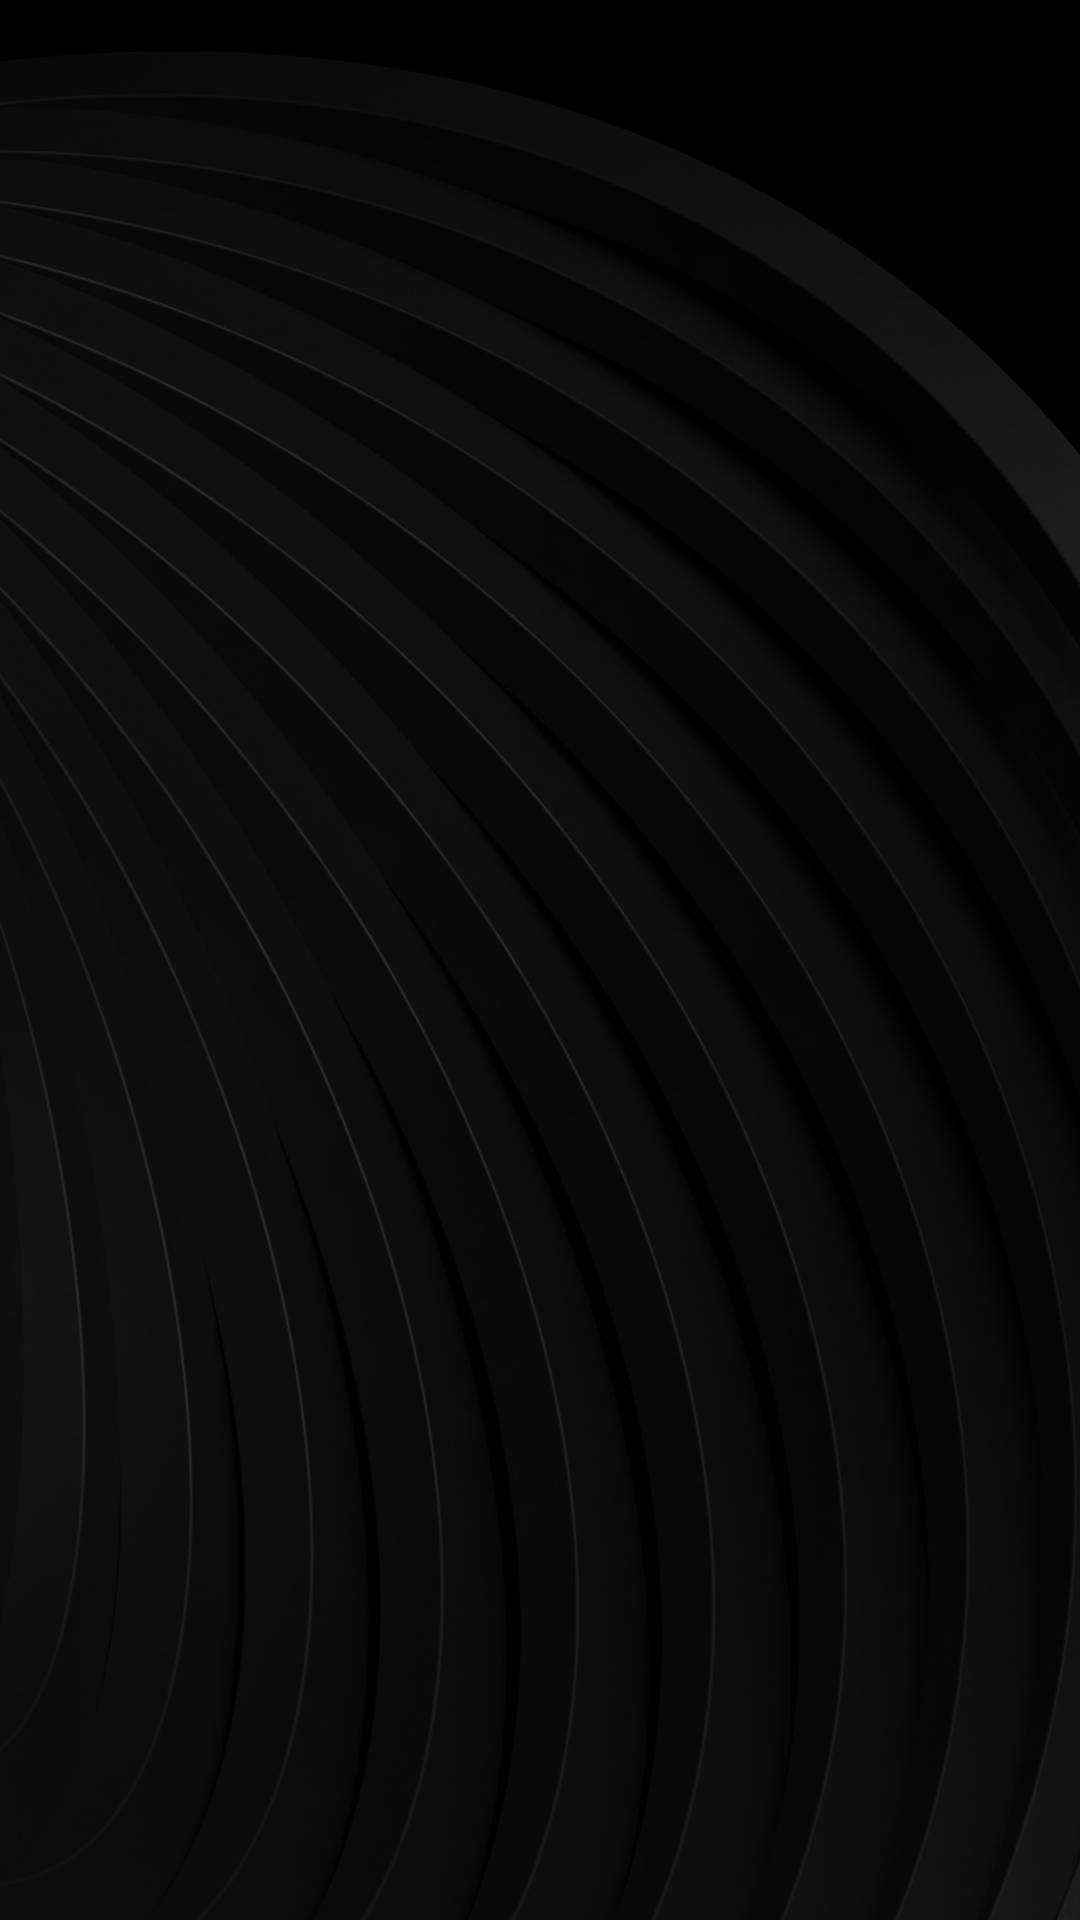 Mesmerizing Pure Black Hd Phone Wallpaper With Elegant Abstract Curves Background